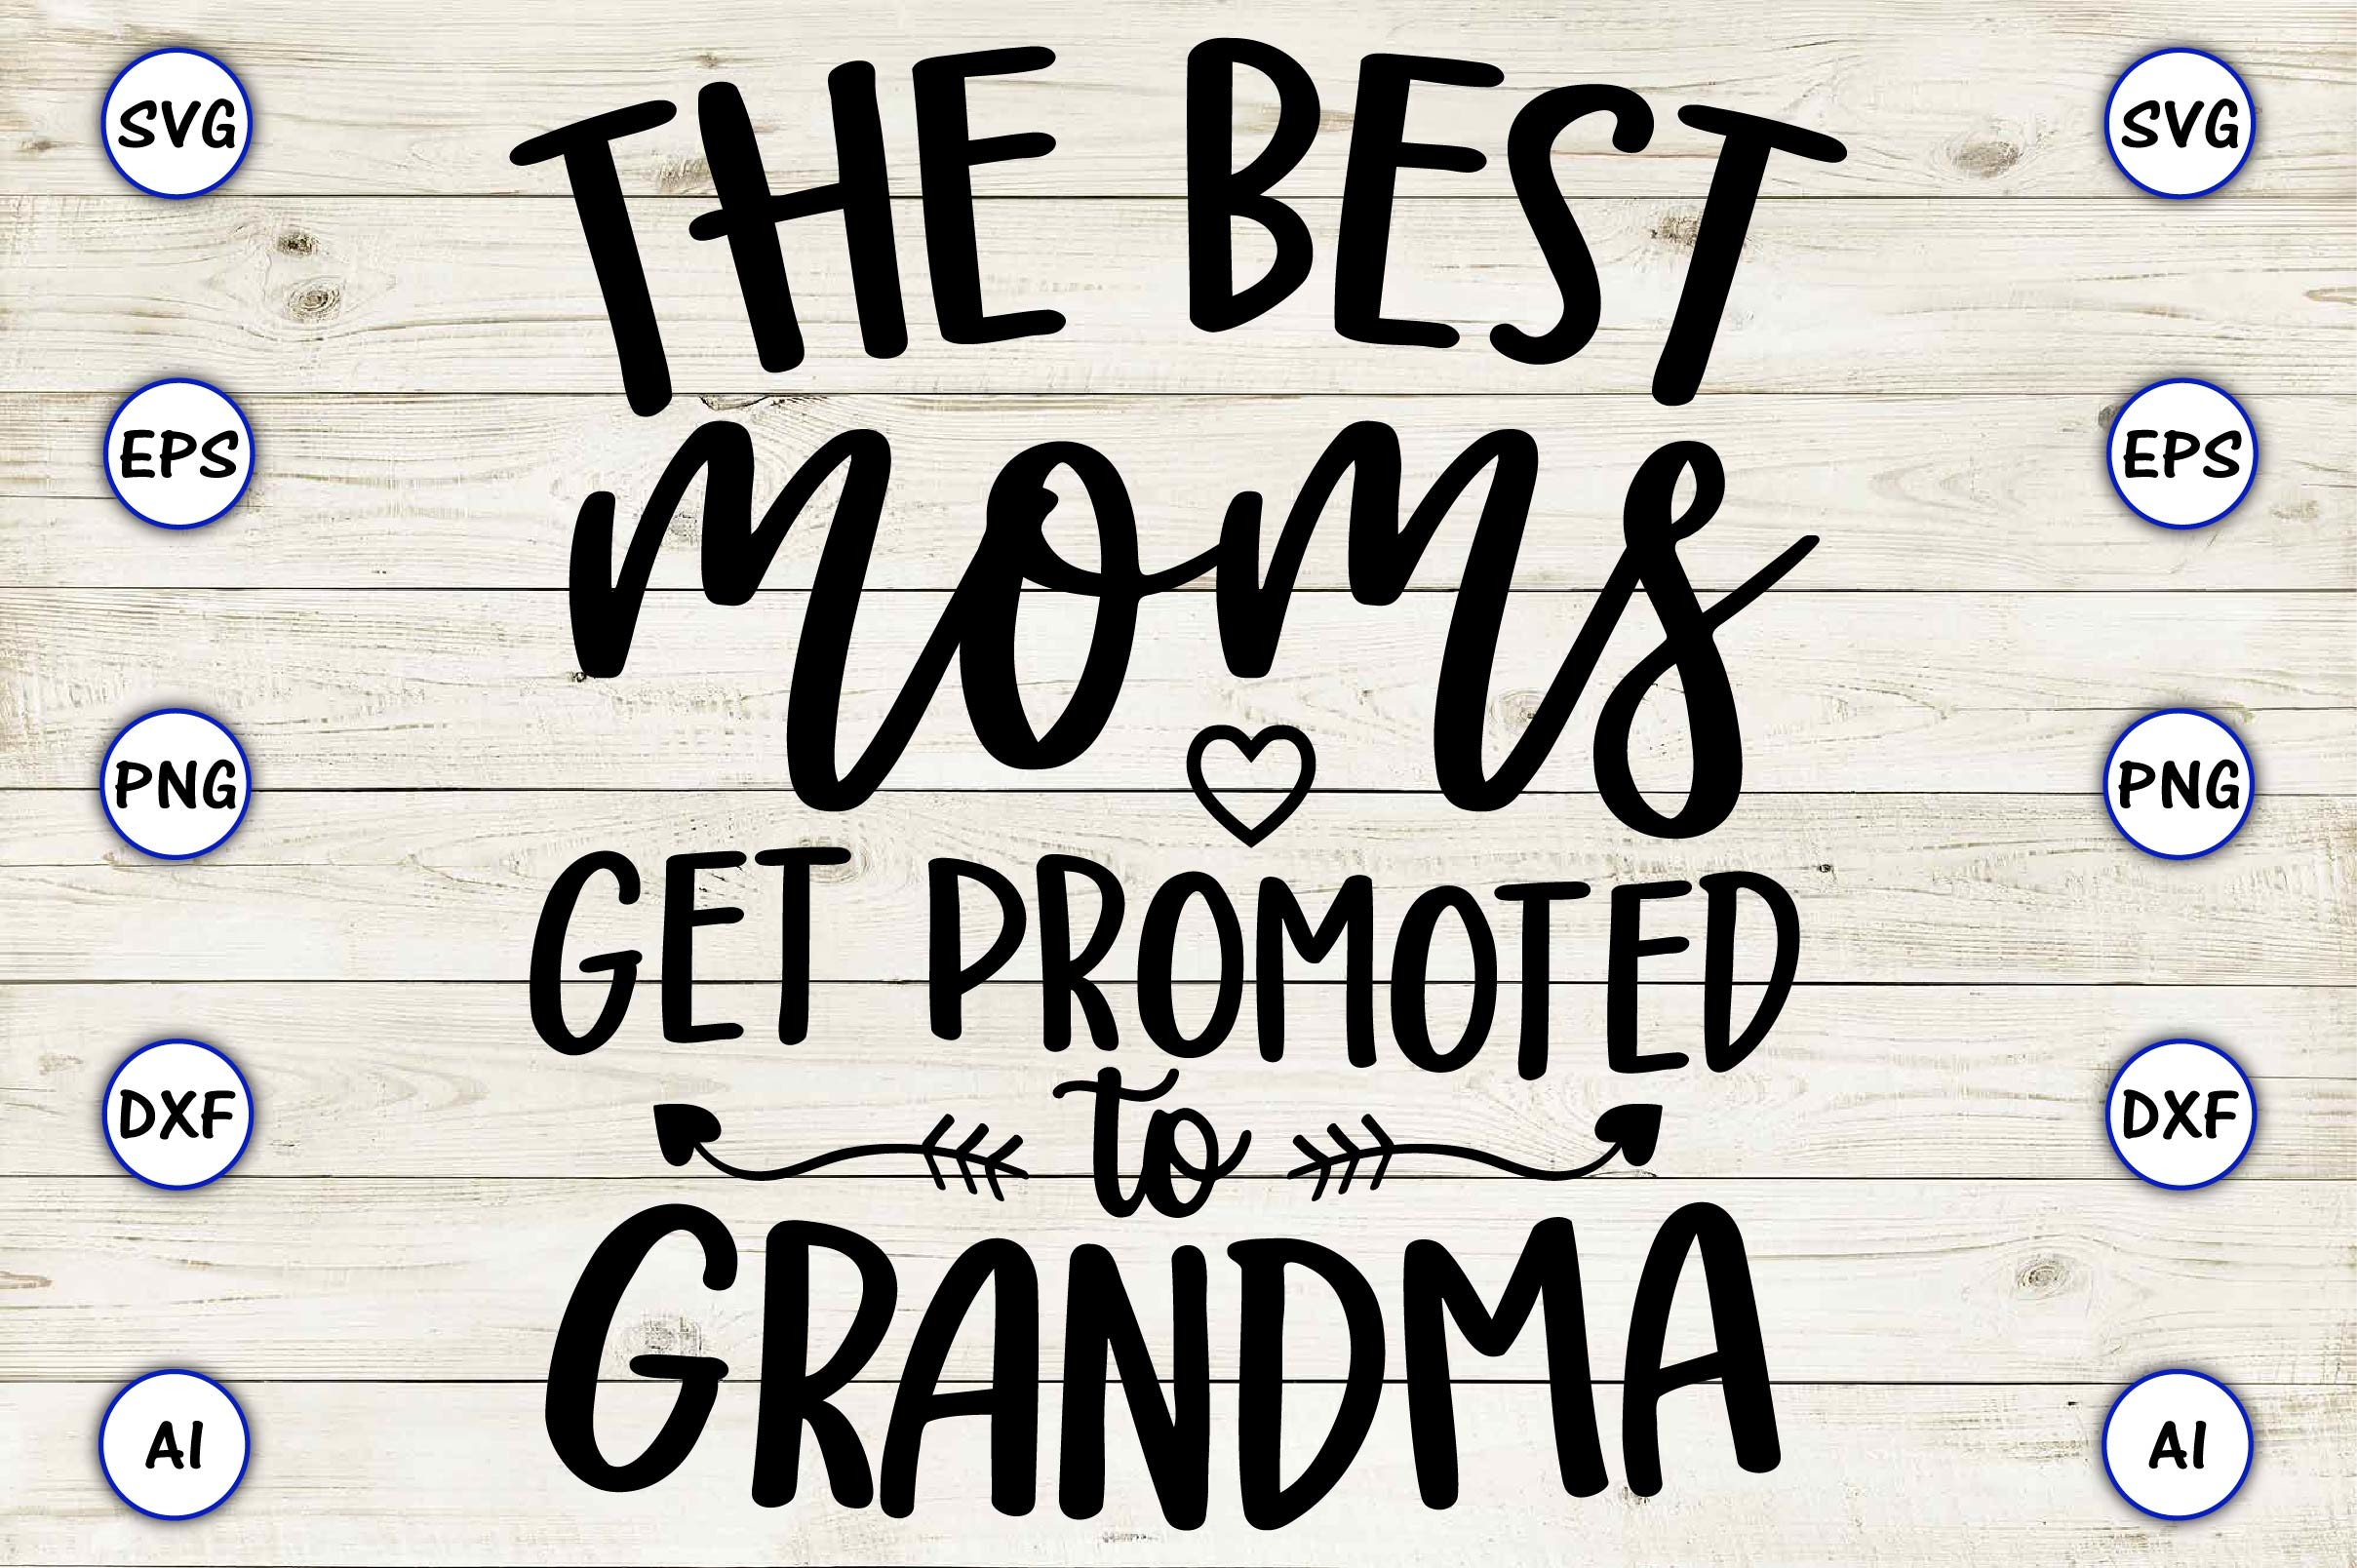 The Best Moms Get Promoted To Grandma Graphic By Artunique24 · Creative Fabrica